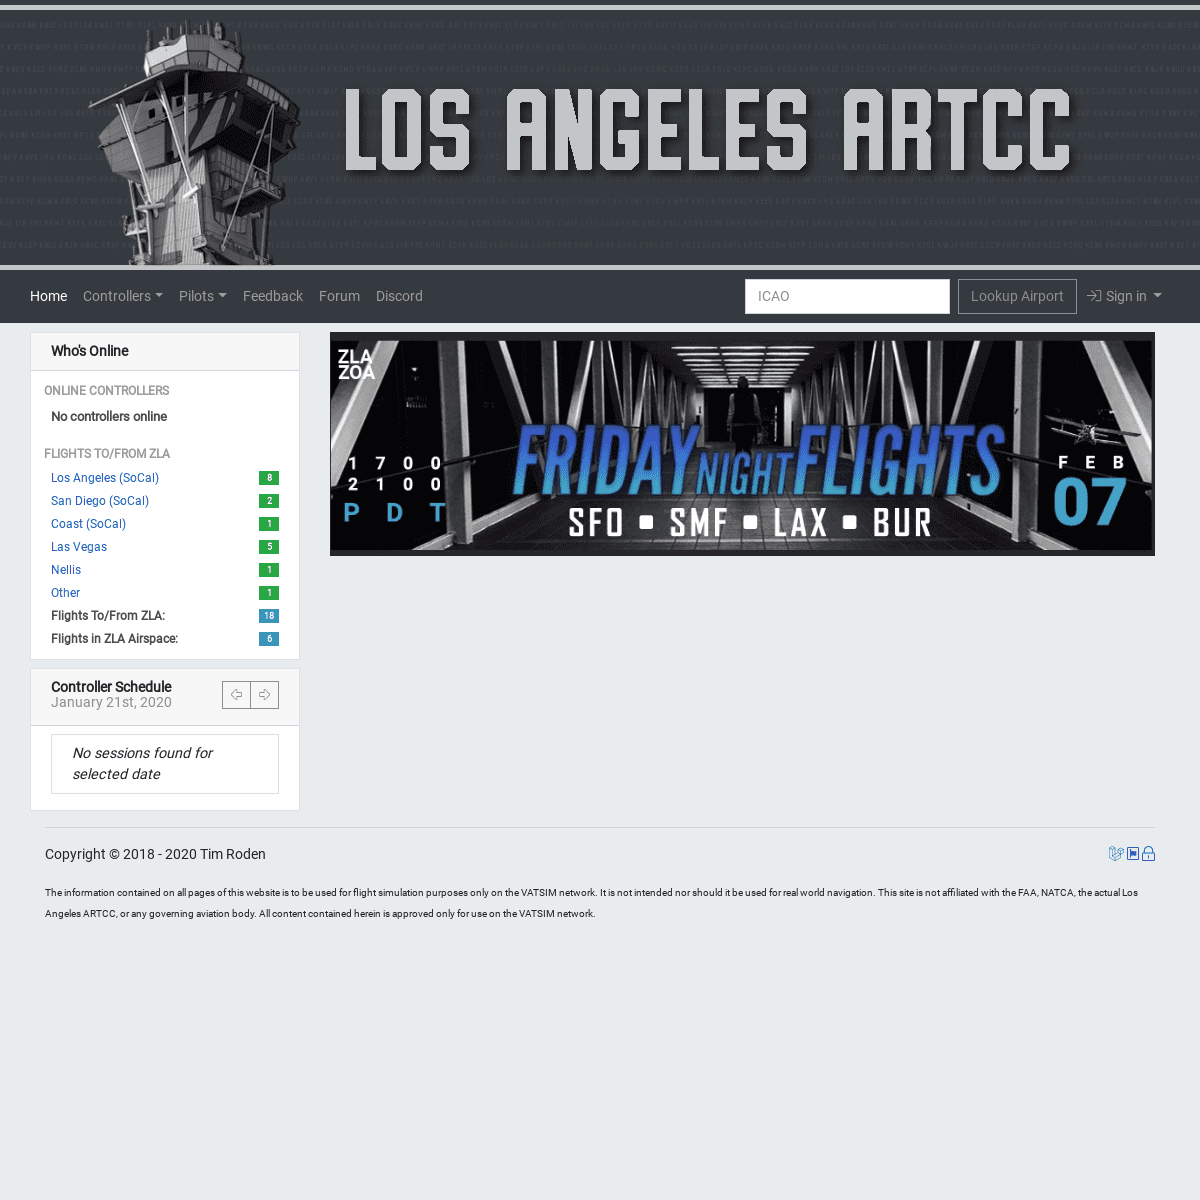 A complete backup of laartcc.org